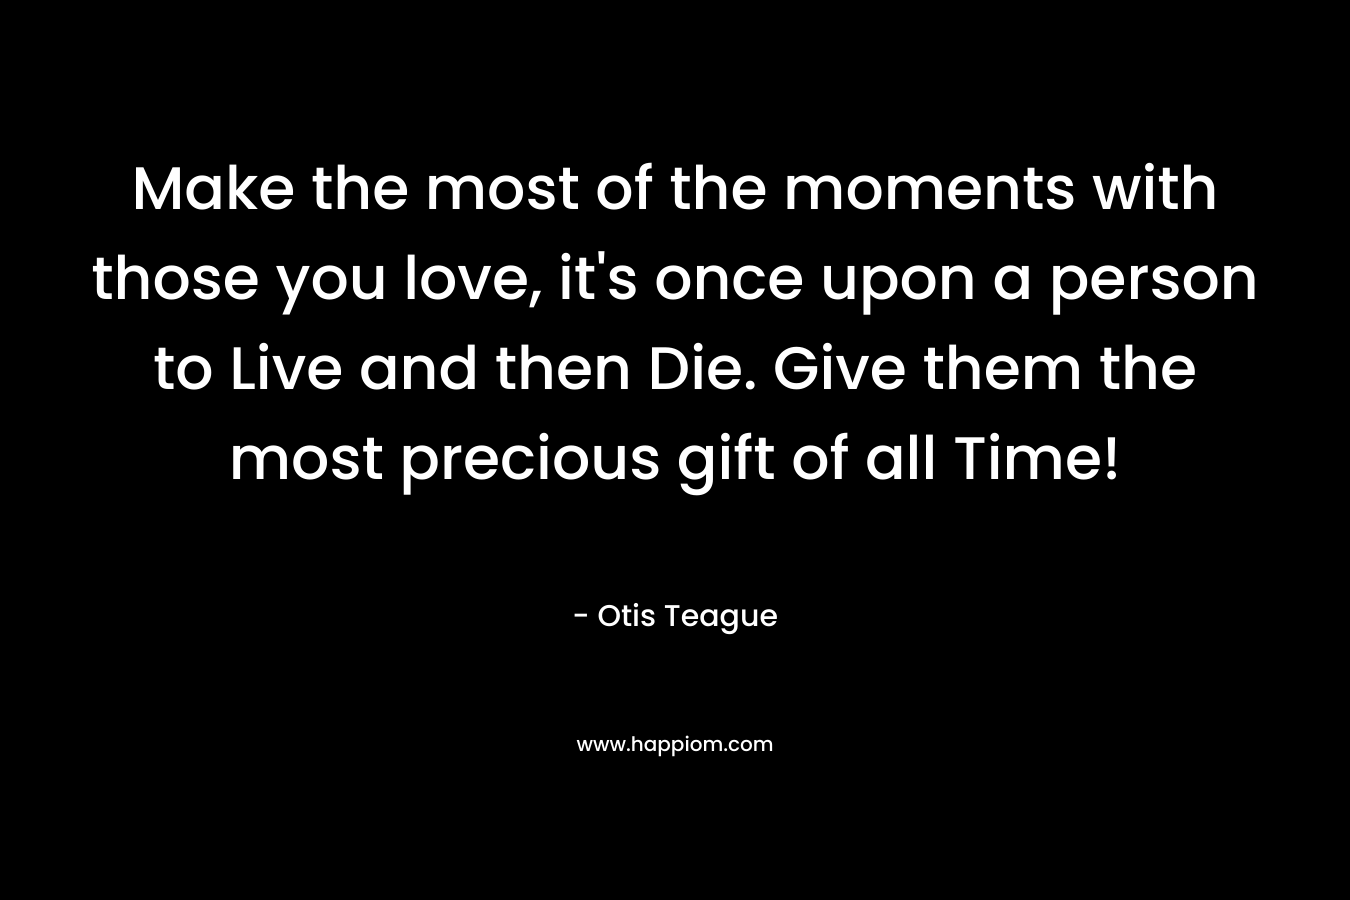 Make the most of the moments with those you love, it's once upon a person to Live and then Die. Give them the most precious gift of all Time!